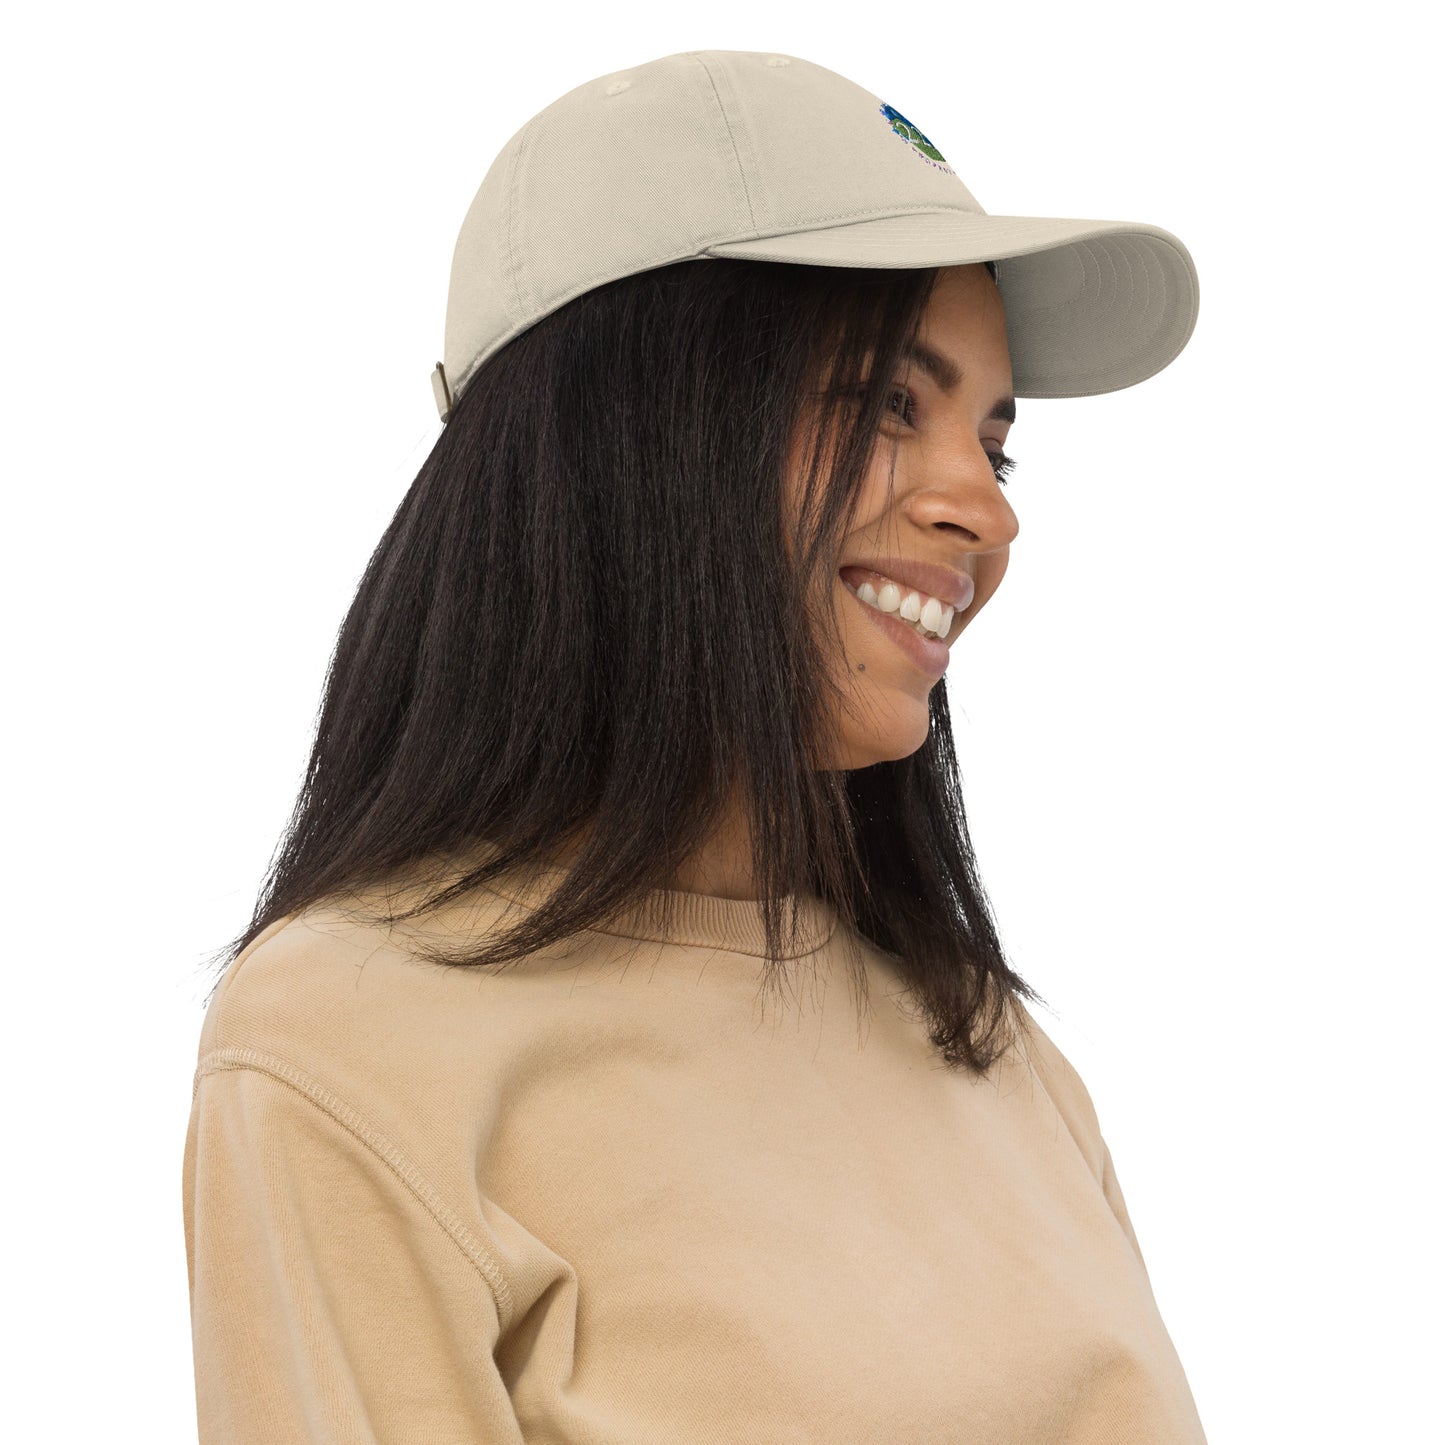 In Perfect Balance 222 Angel Number Organic Cotton dad hat